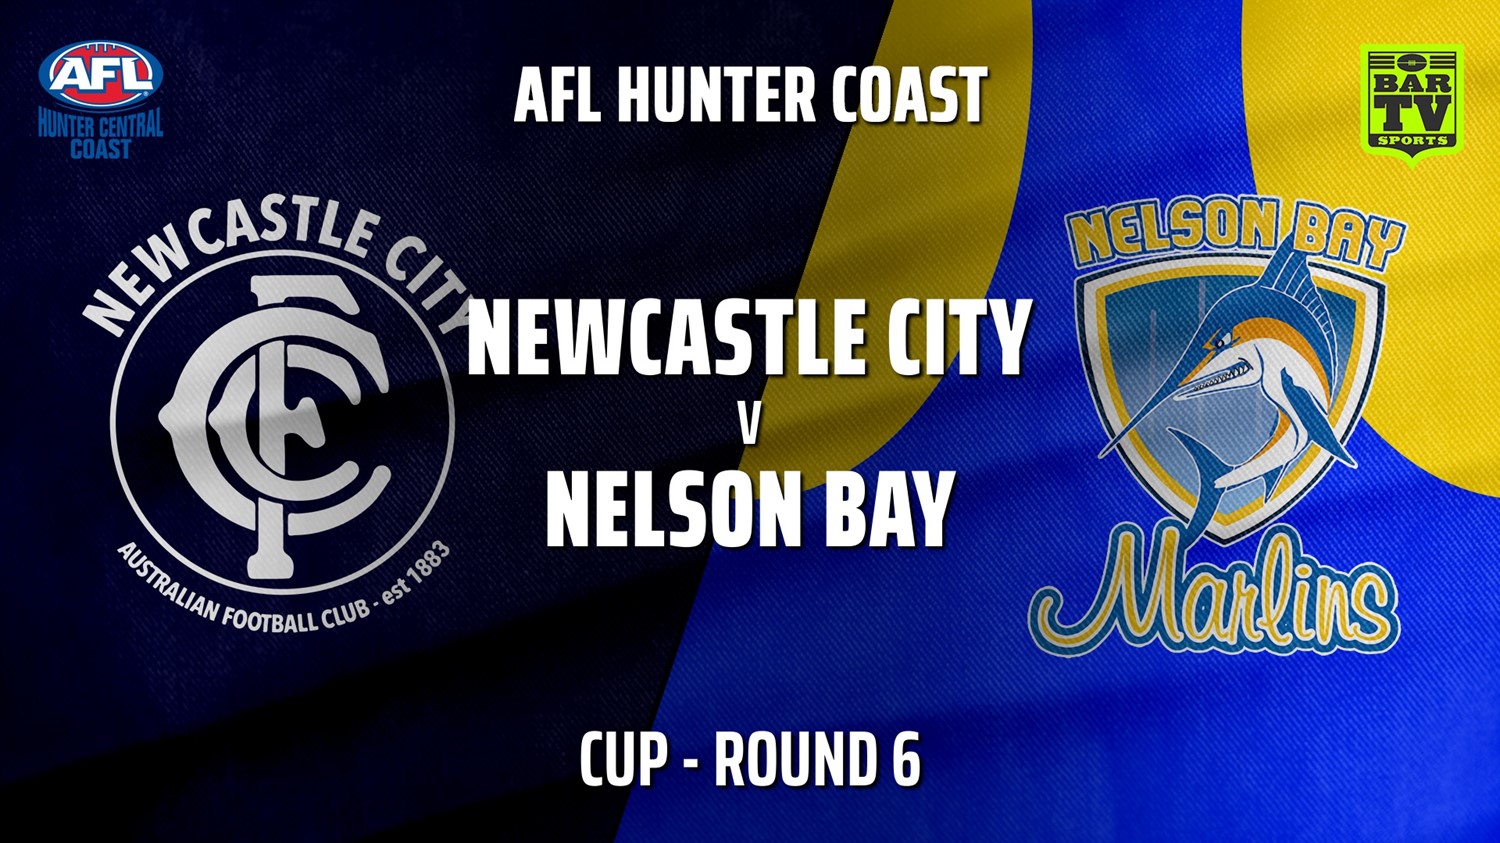 210515-AFL HCC Round 6 - Cup - Newcastle City  v Nelson Bay Marlins Slate Image